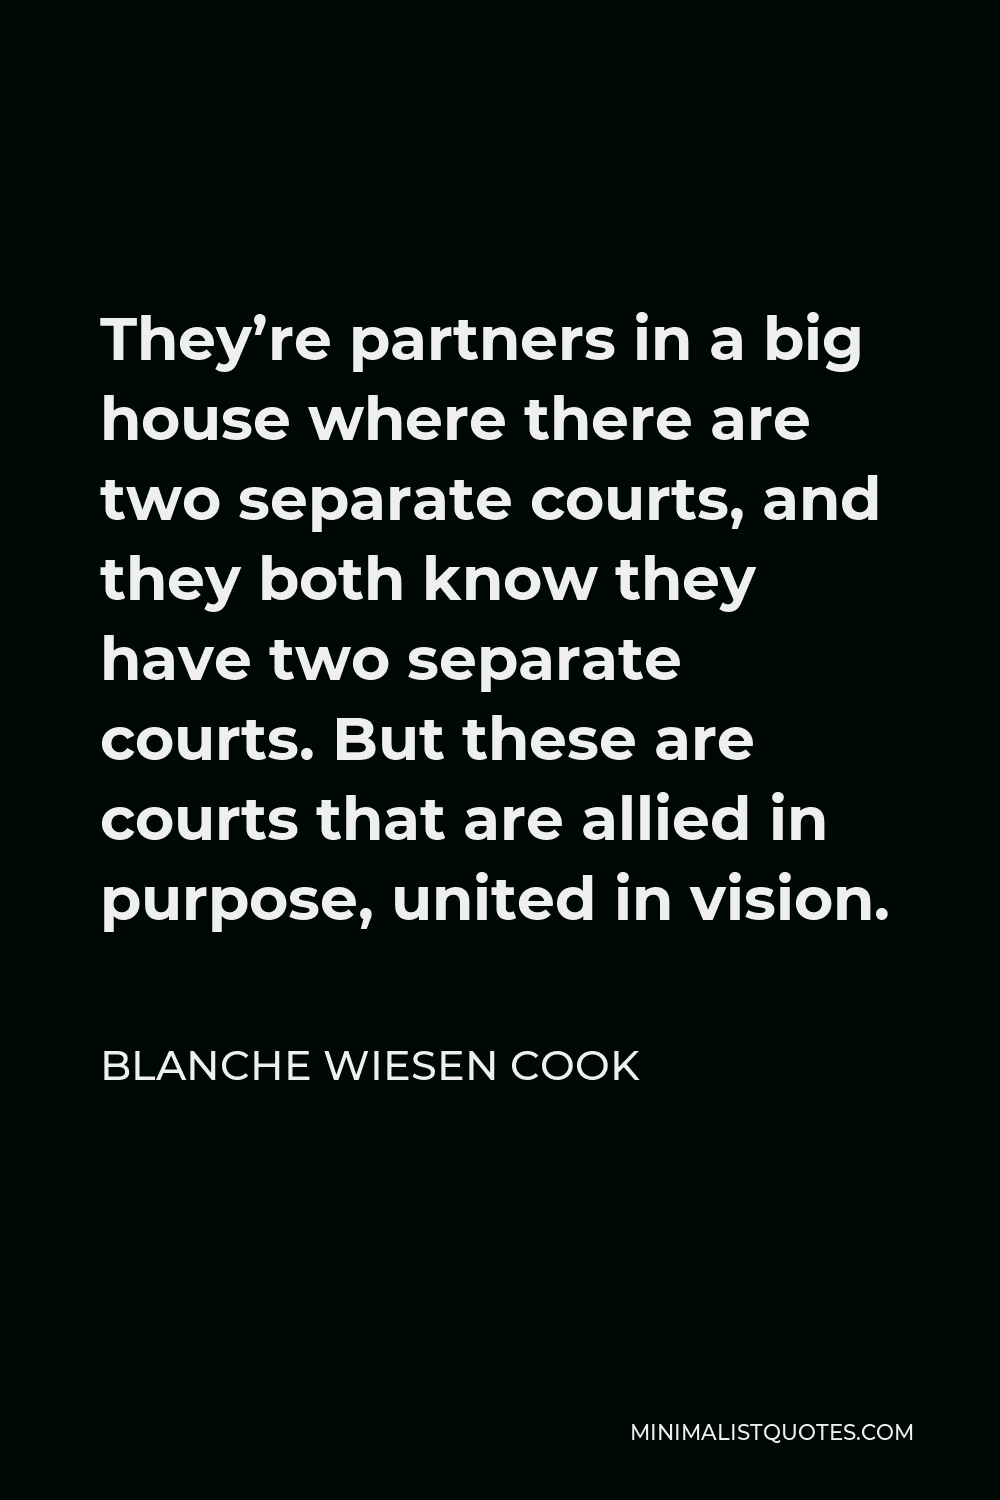 Blanche Wiesen Cook Quote - They’re partners in a big house where there are two separate courts, and they both know they have two separate courts. But these are courts that are allied in purpose, united in vision.